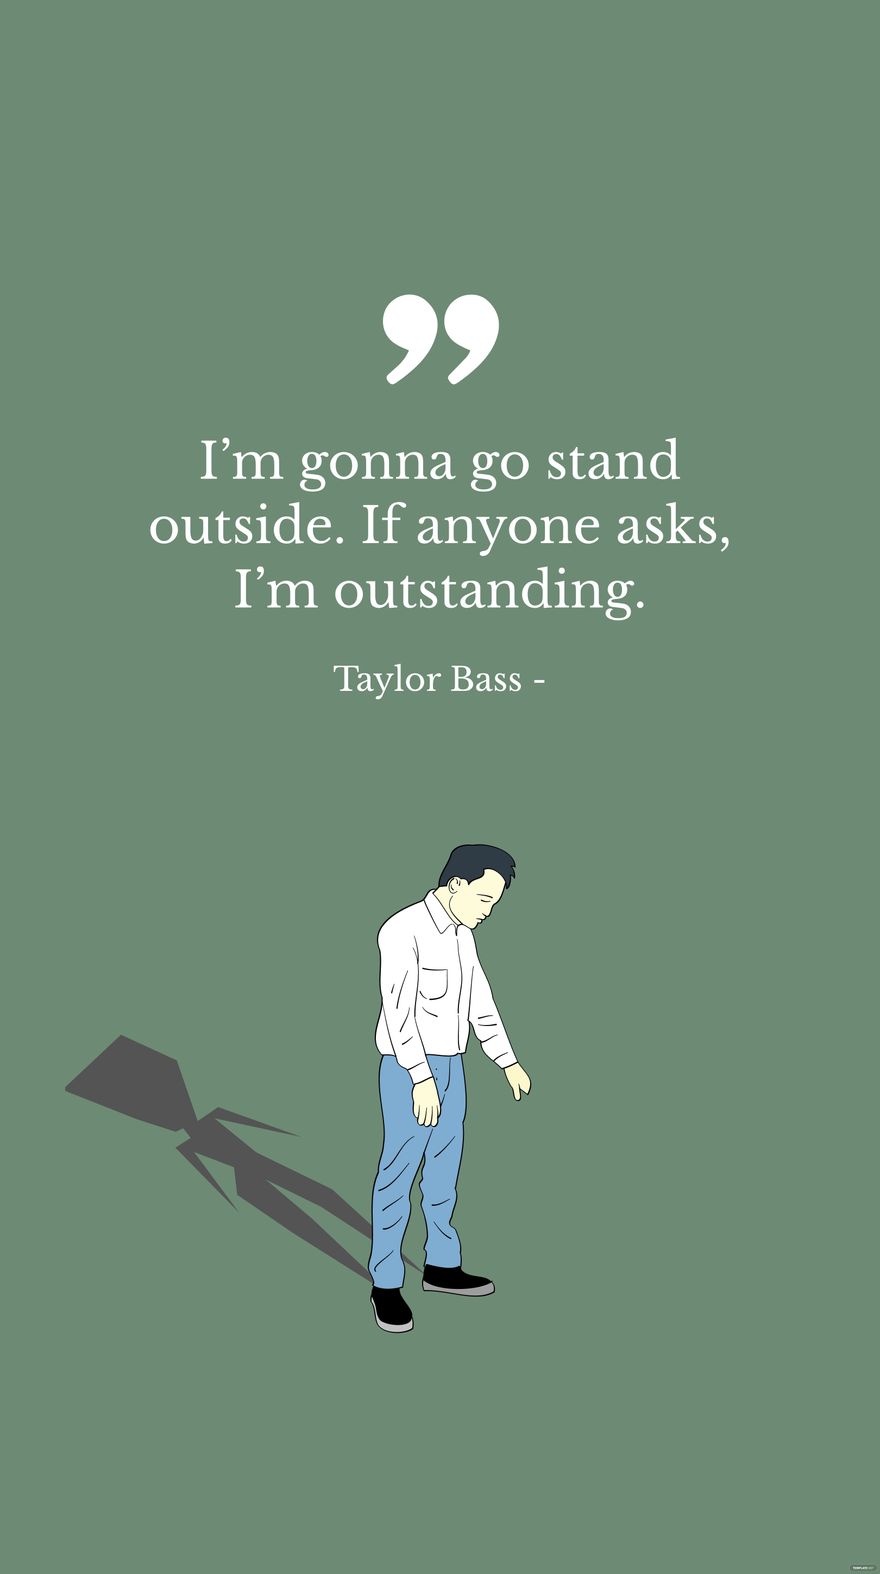 Taylor Bass - I’m gonna go stand outside. If anyone asks, I’m outstanding. in JPG